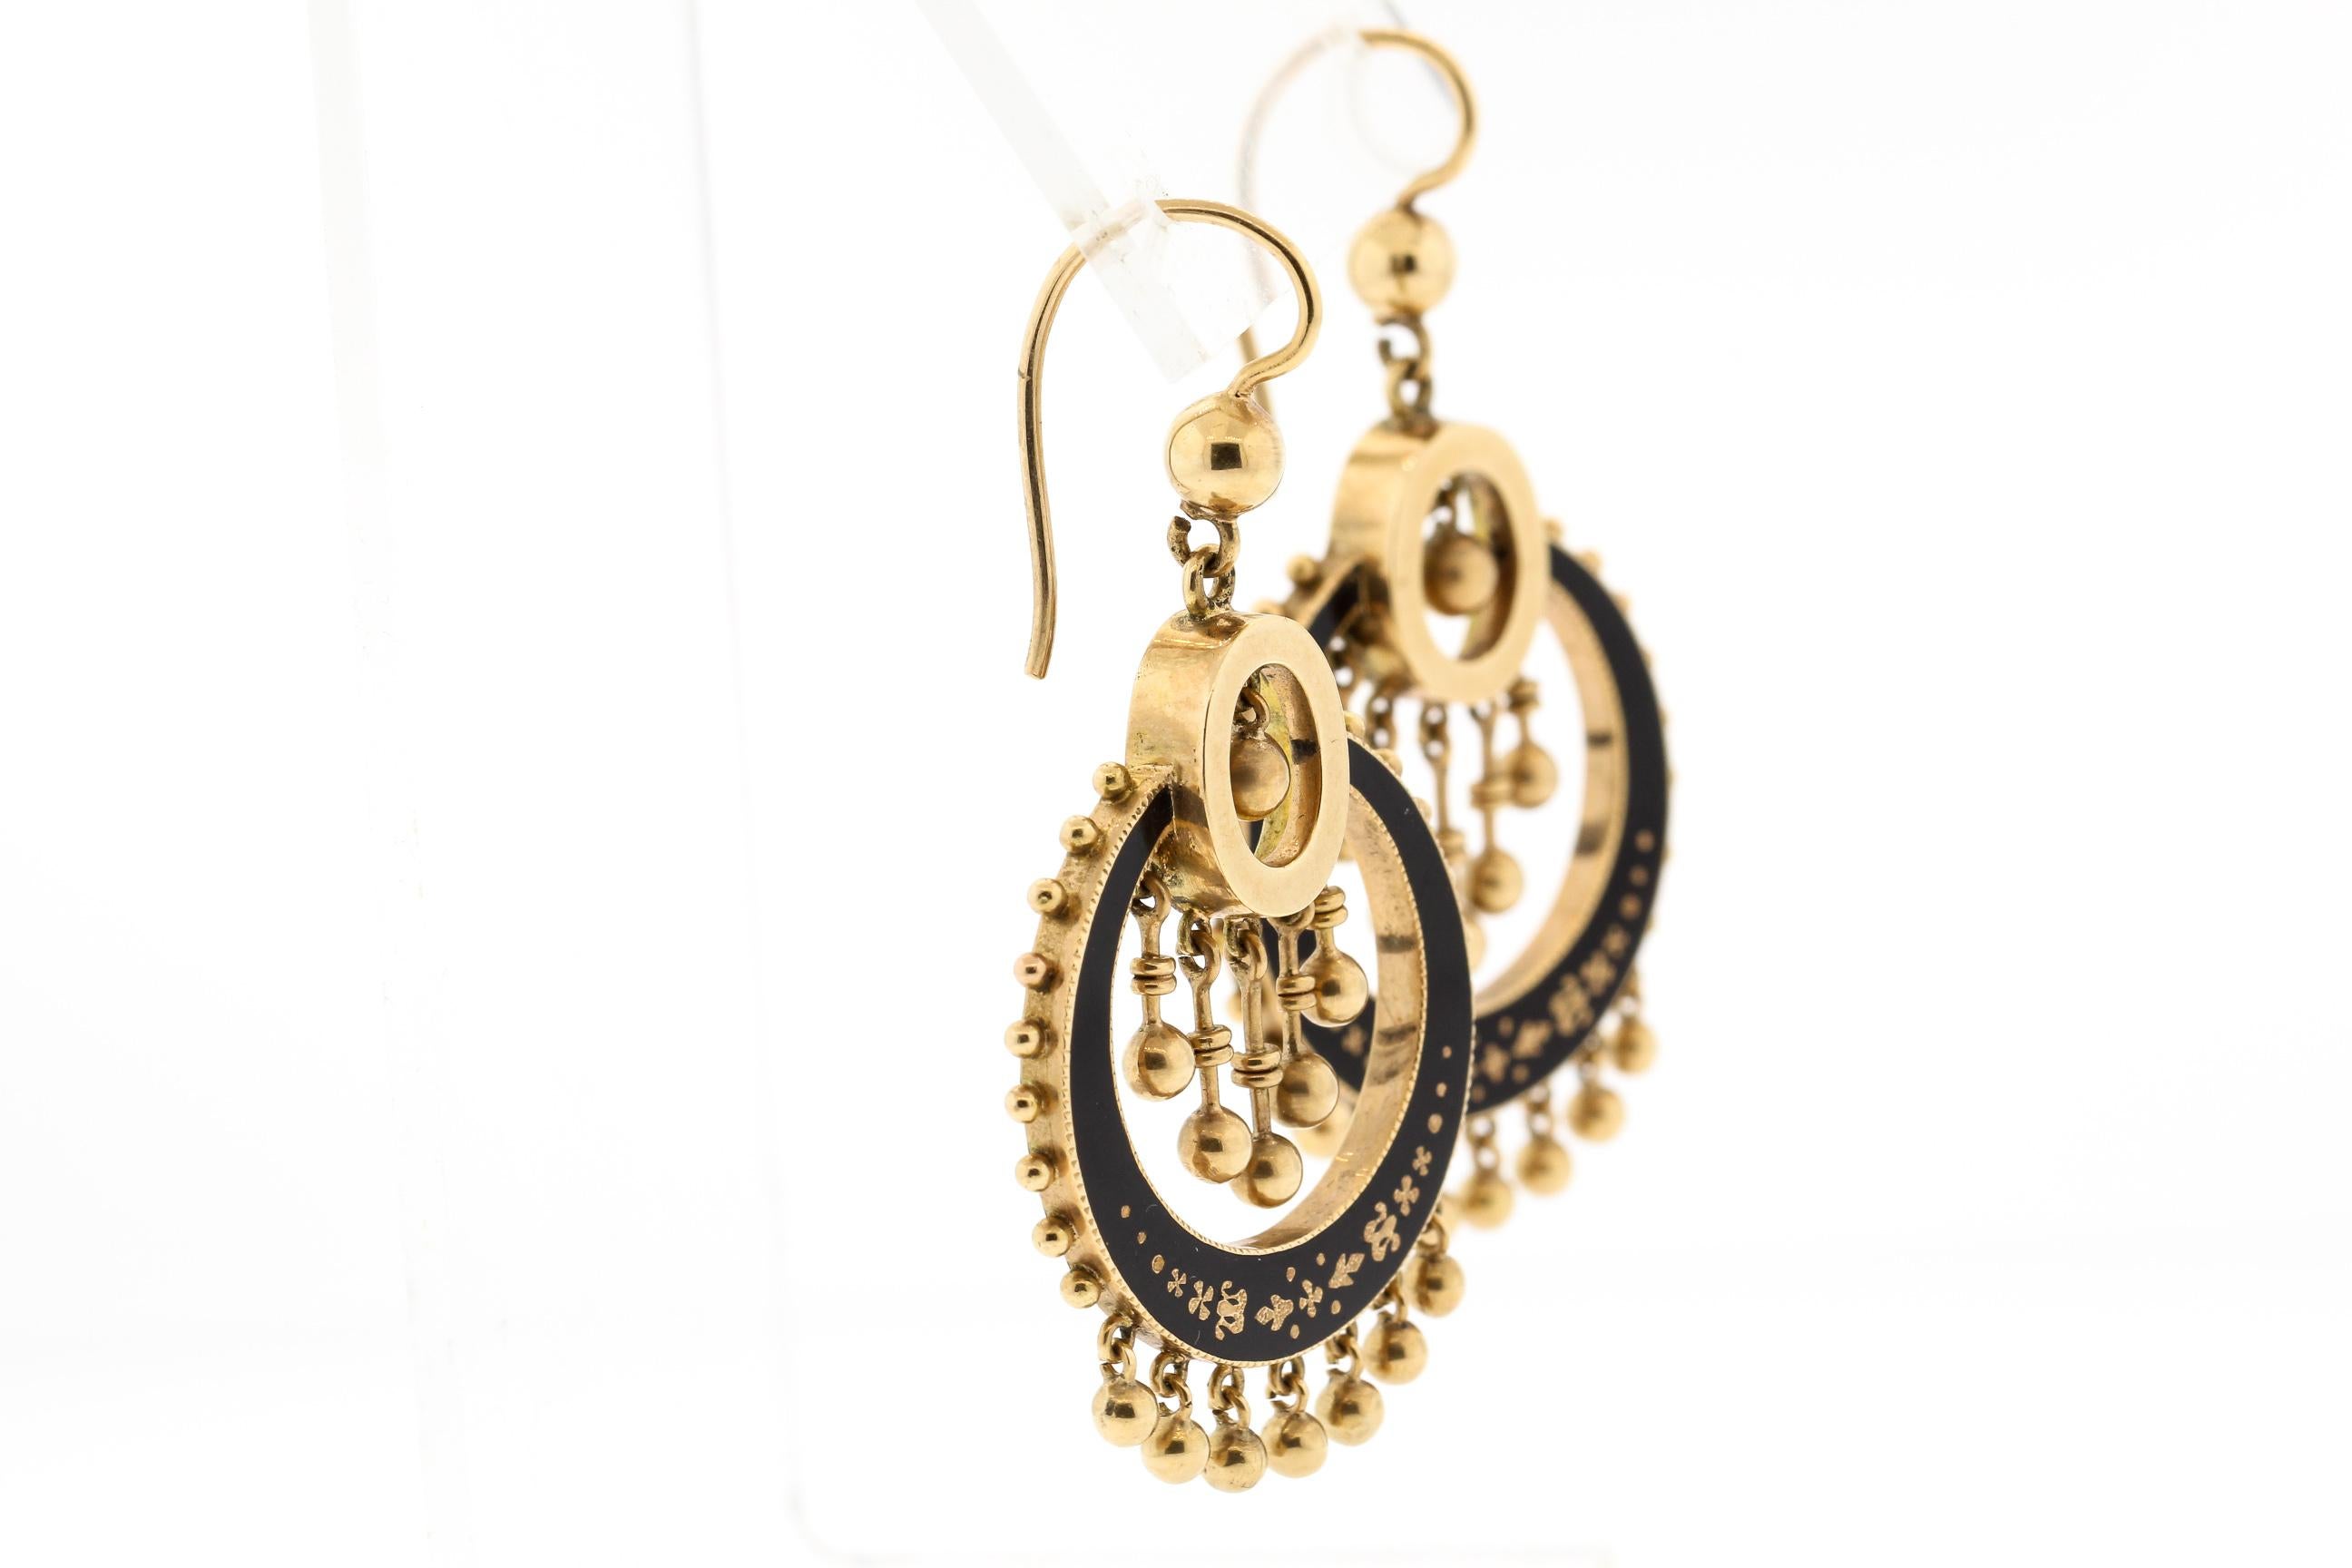 A feminine pair of antique Victorian black enamel earrings, circa 1880. This pair made in 14k yellow gold has beautiful gold balls hanging from the bottom, with the enter featuring a cascade of moveable gold bars with balls at the end. The earring